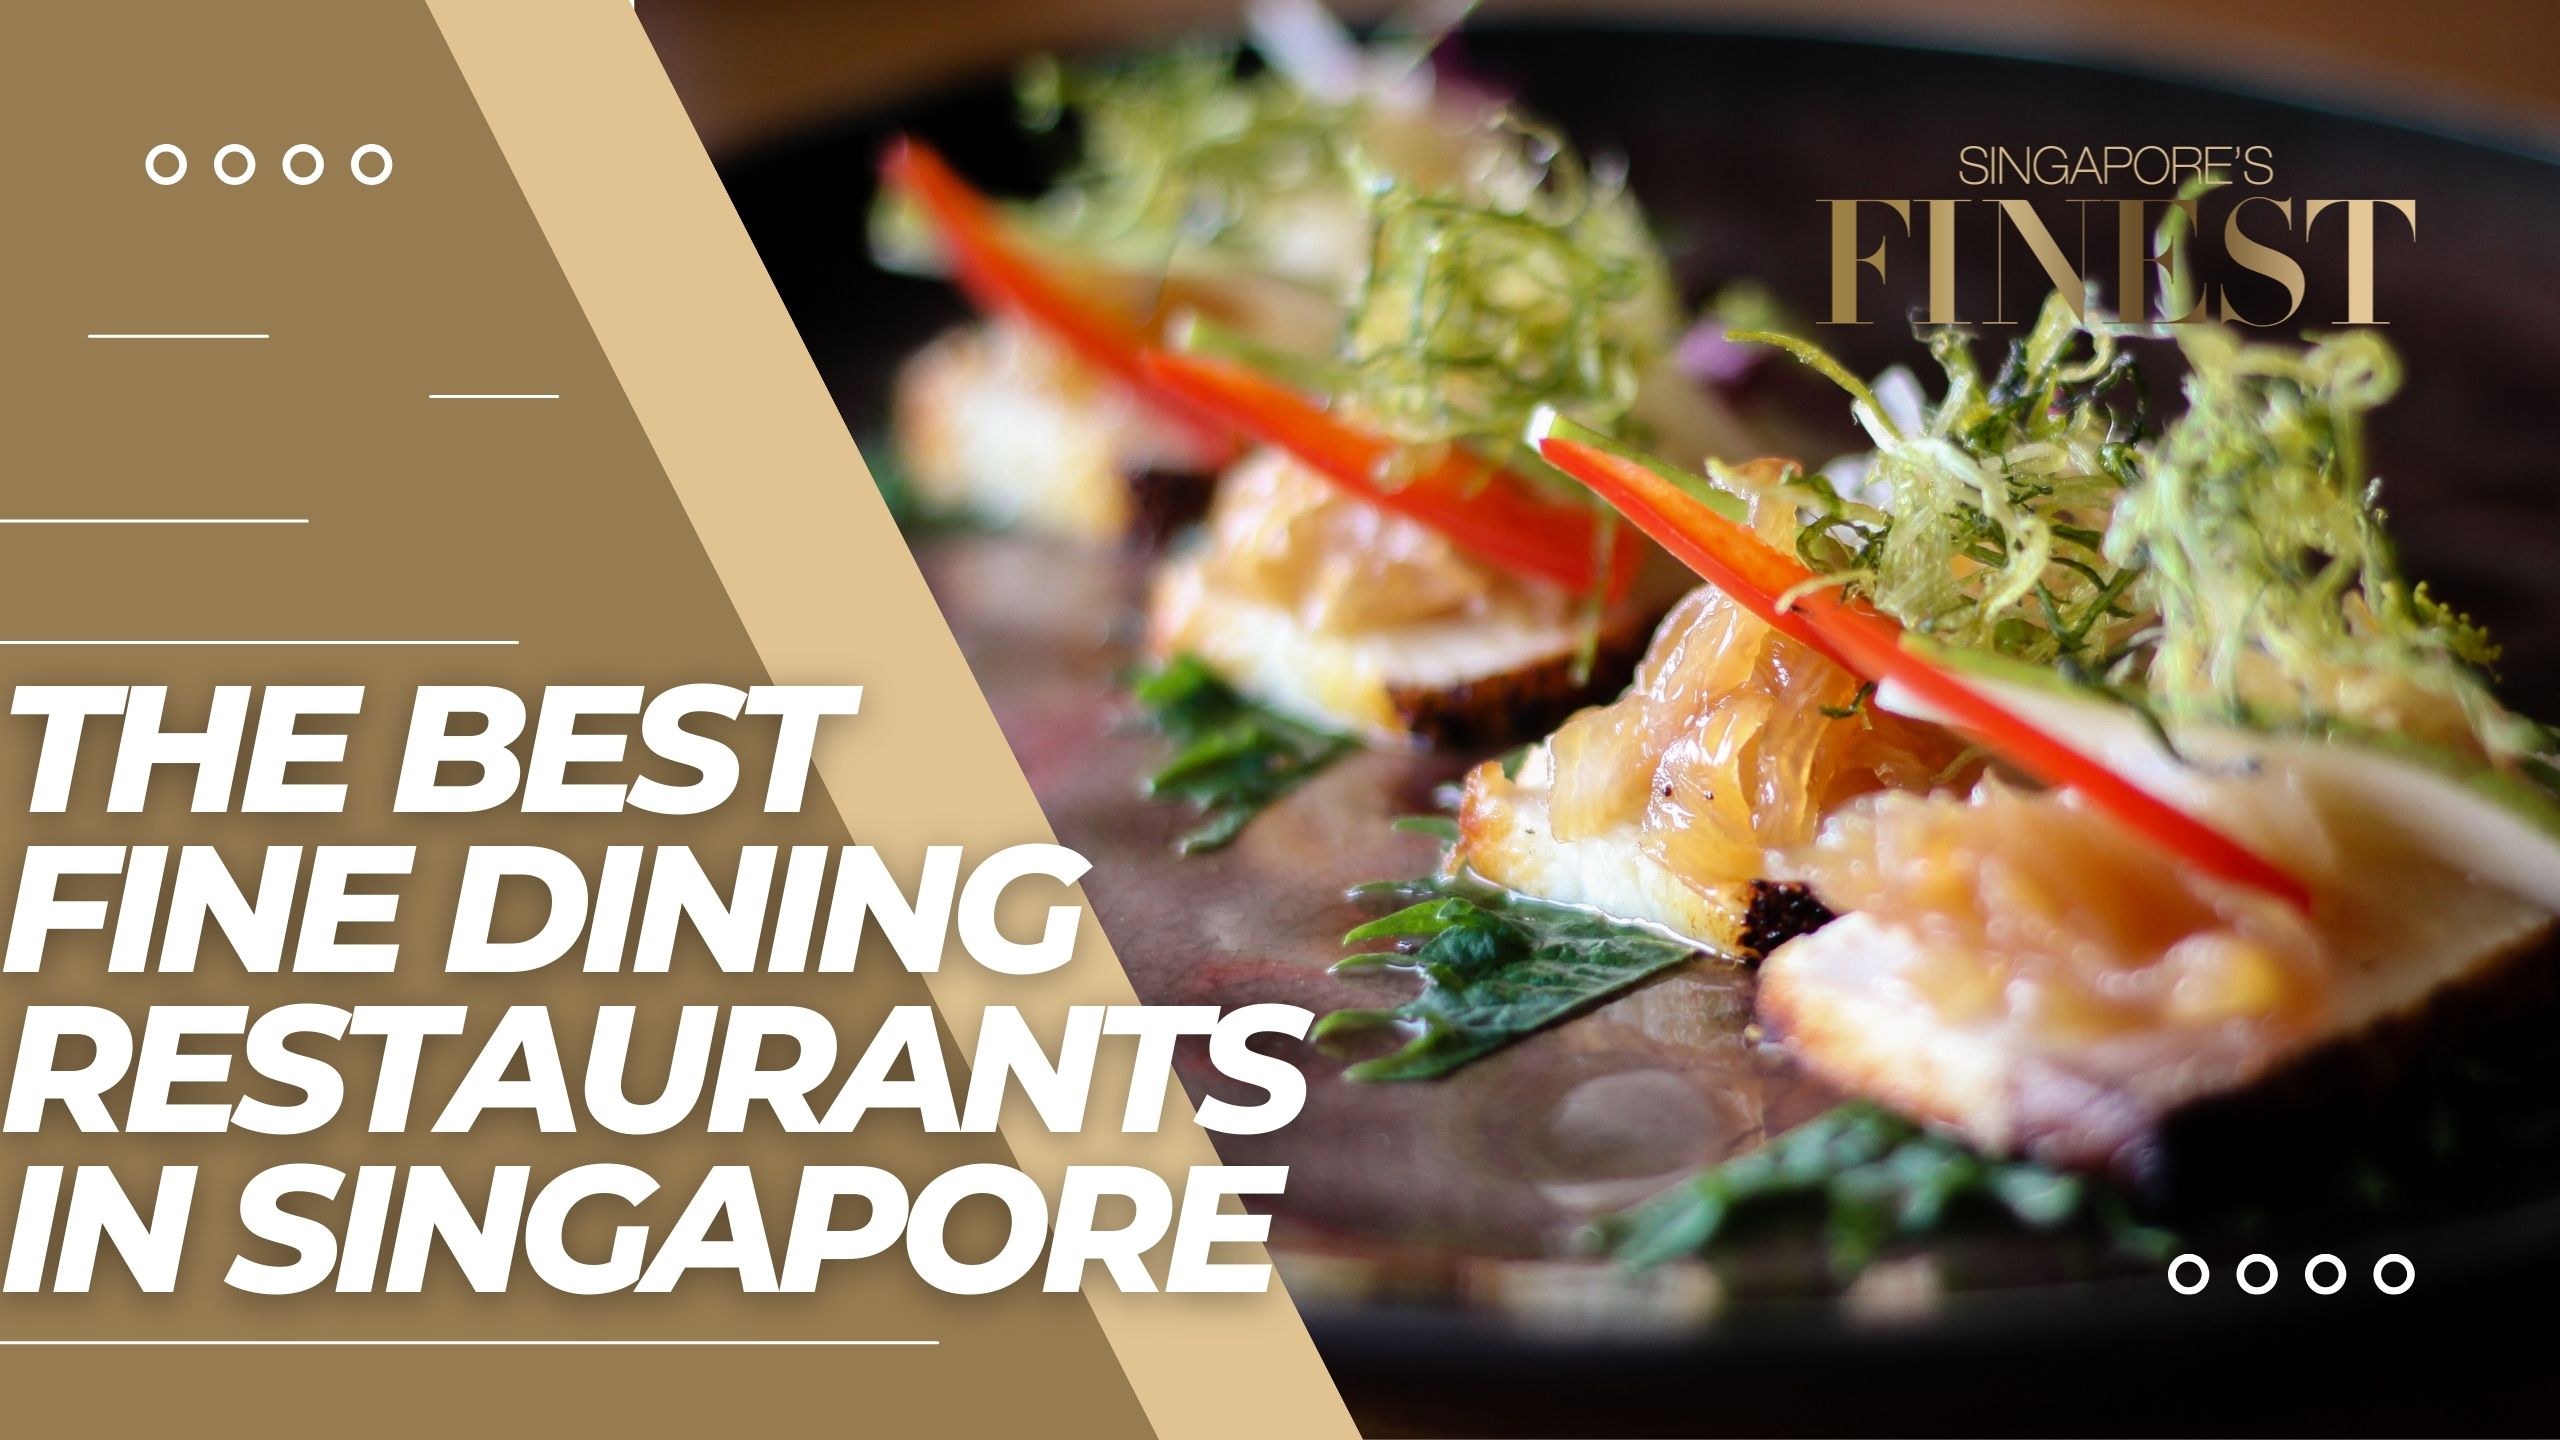 The Finest Fine Dining Restaurants in Singapore